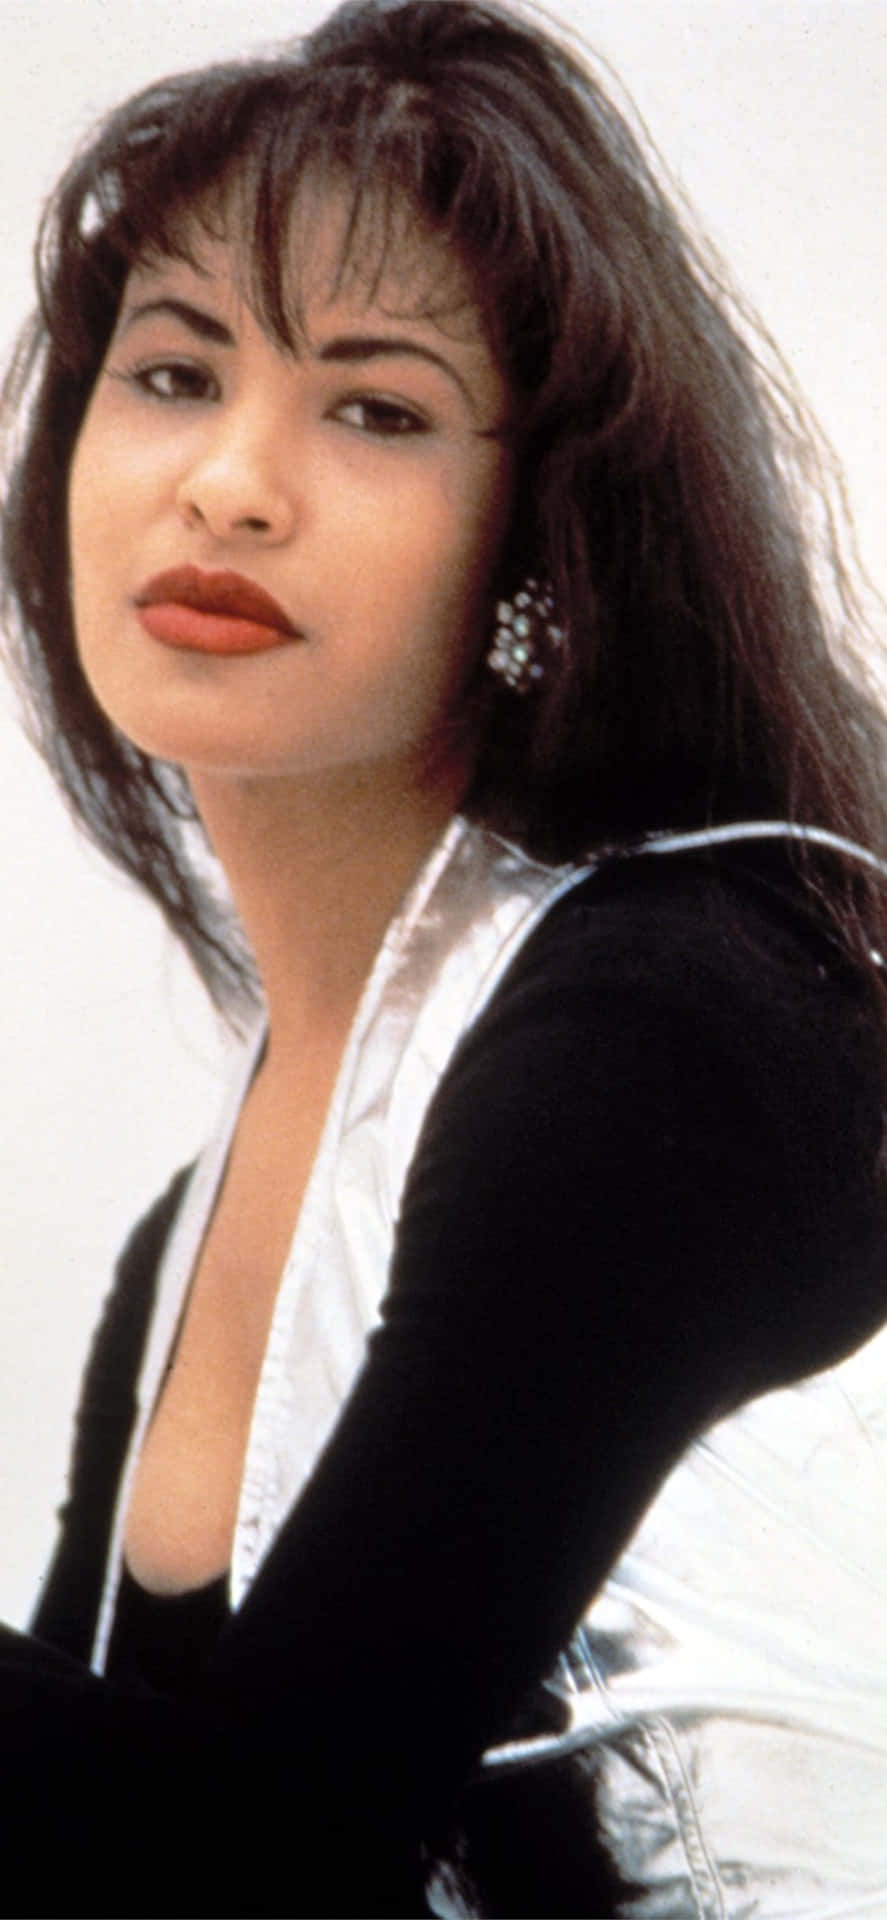 Show off your love for Selena Quintanilla with this iPhone Wallpaper